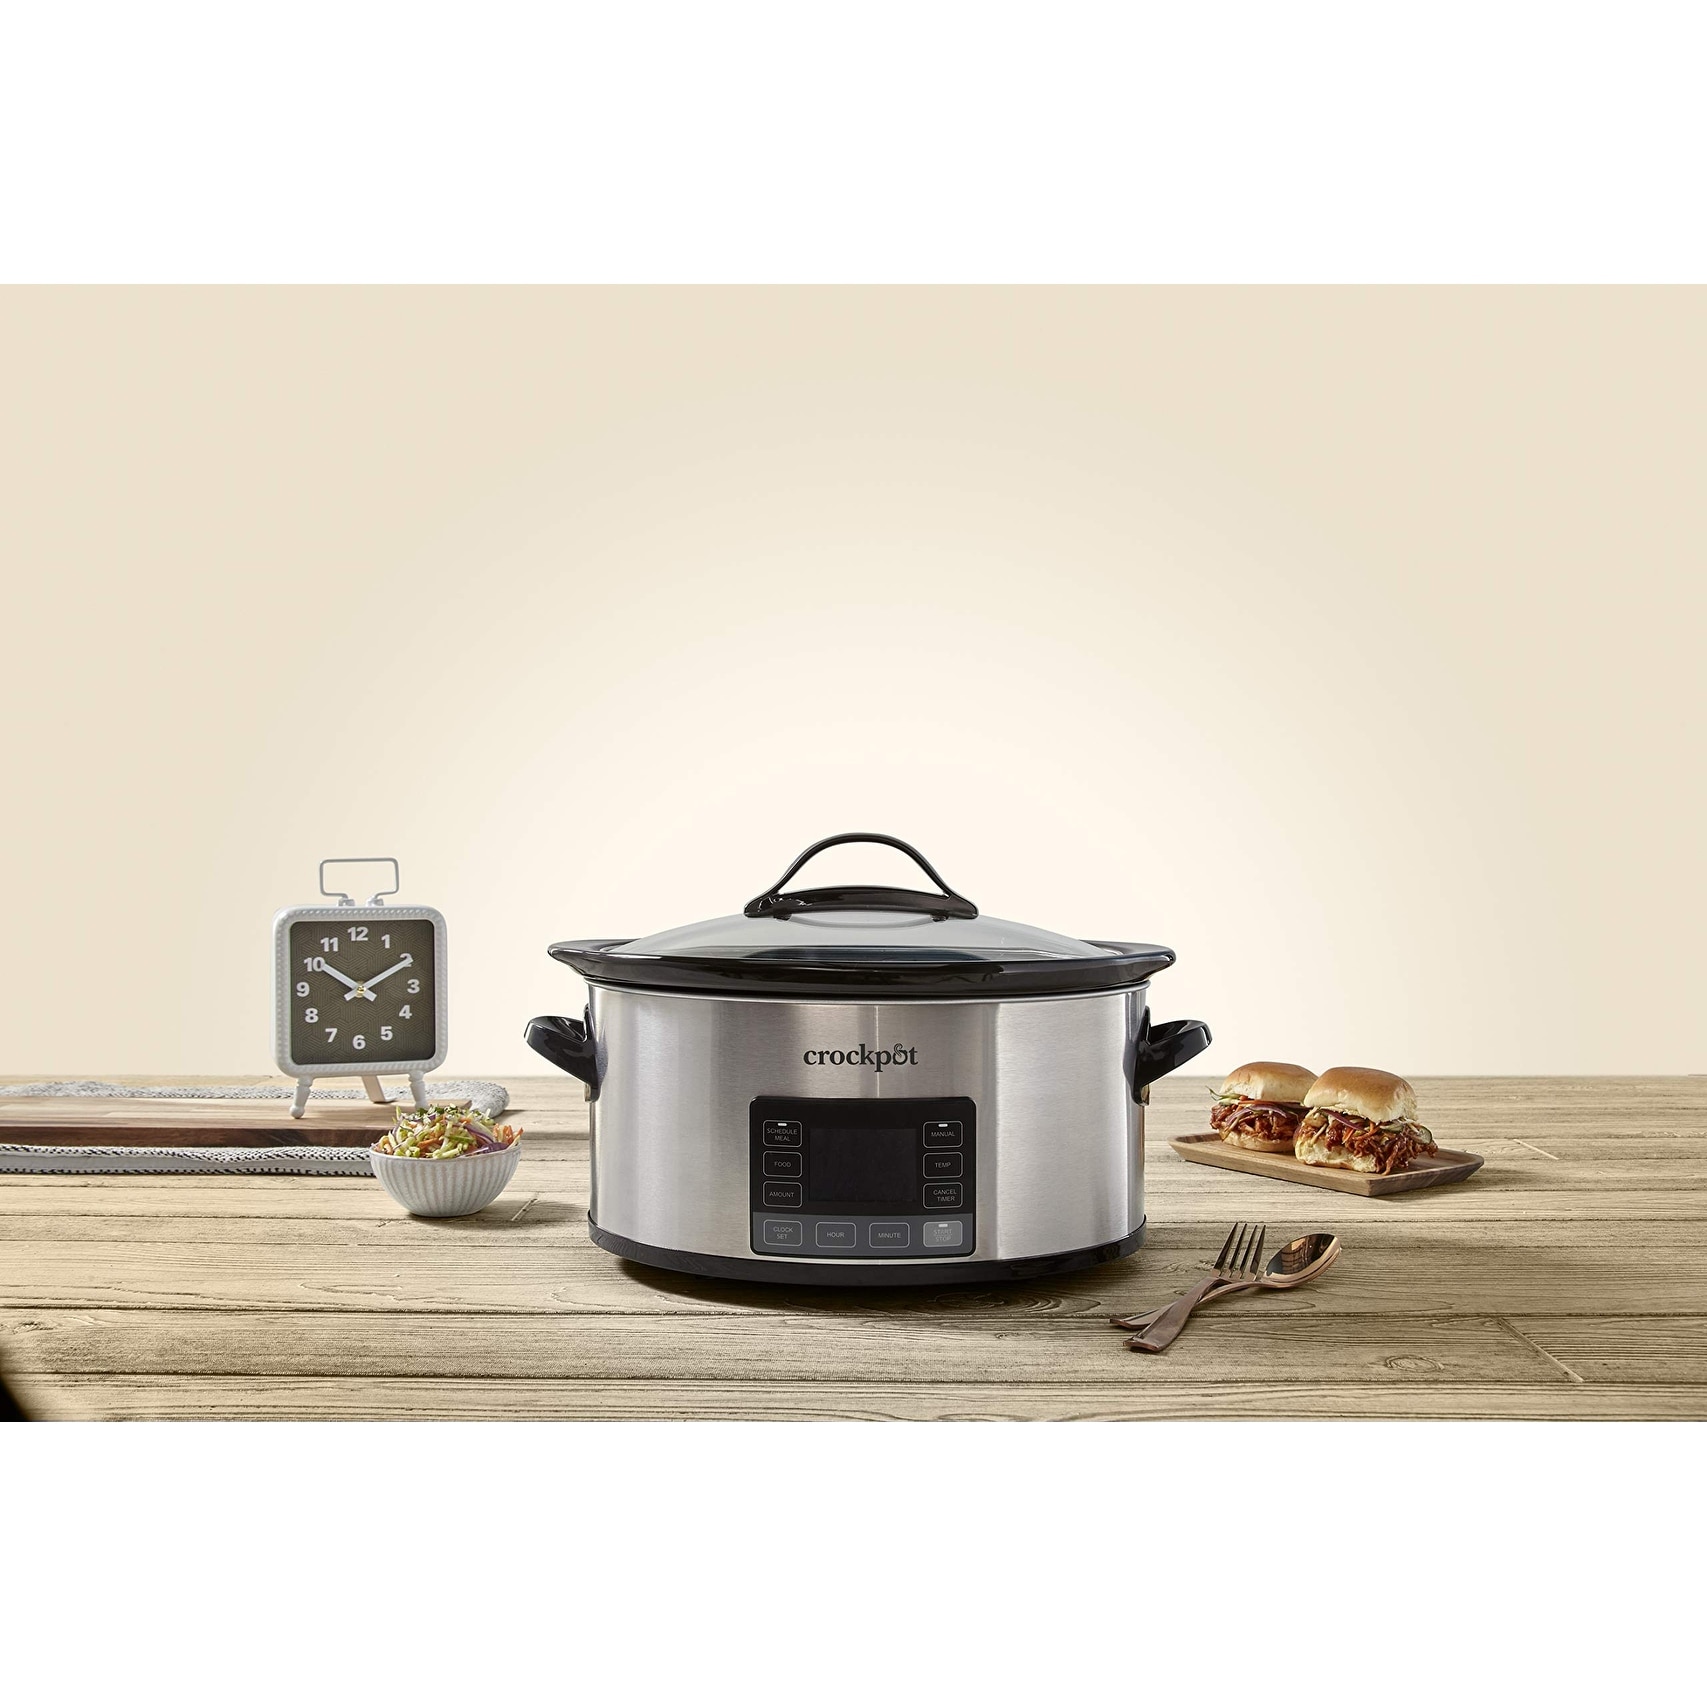 https://ak1.ostkcdn.com/images/products/is/images/direct/a46f364de3ac2827a56e64a3ccd0298e874d3eae/MyTime-Technology-6-Quart-Programmable-Slow-Cooker-and-Food-Warmer-with-Digital-Timer%2C-Stainless-Steel-Slow-Cooker.jpg